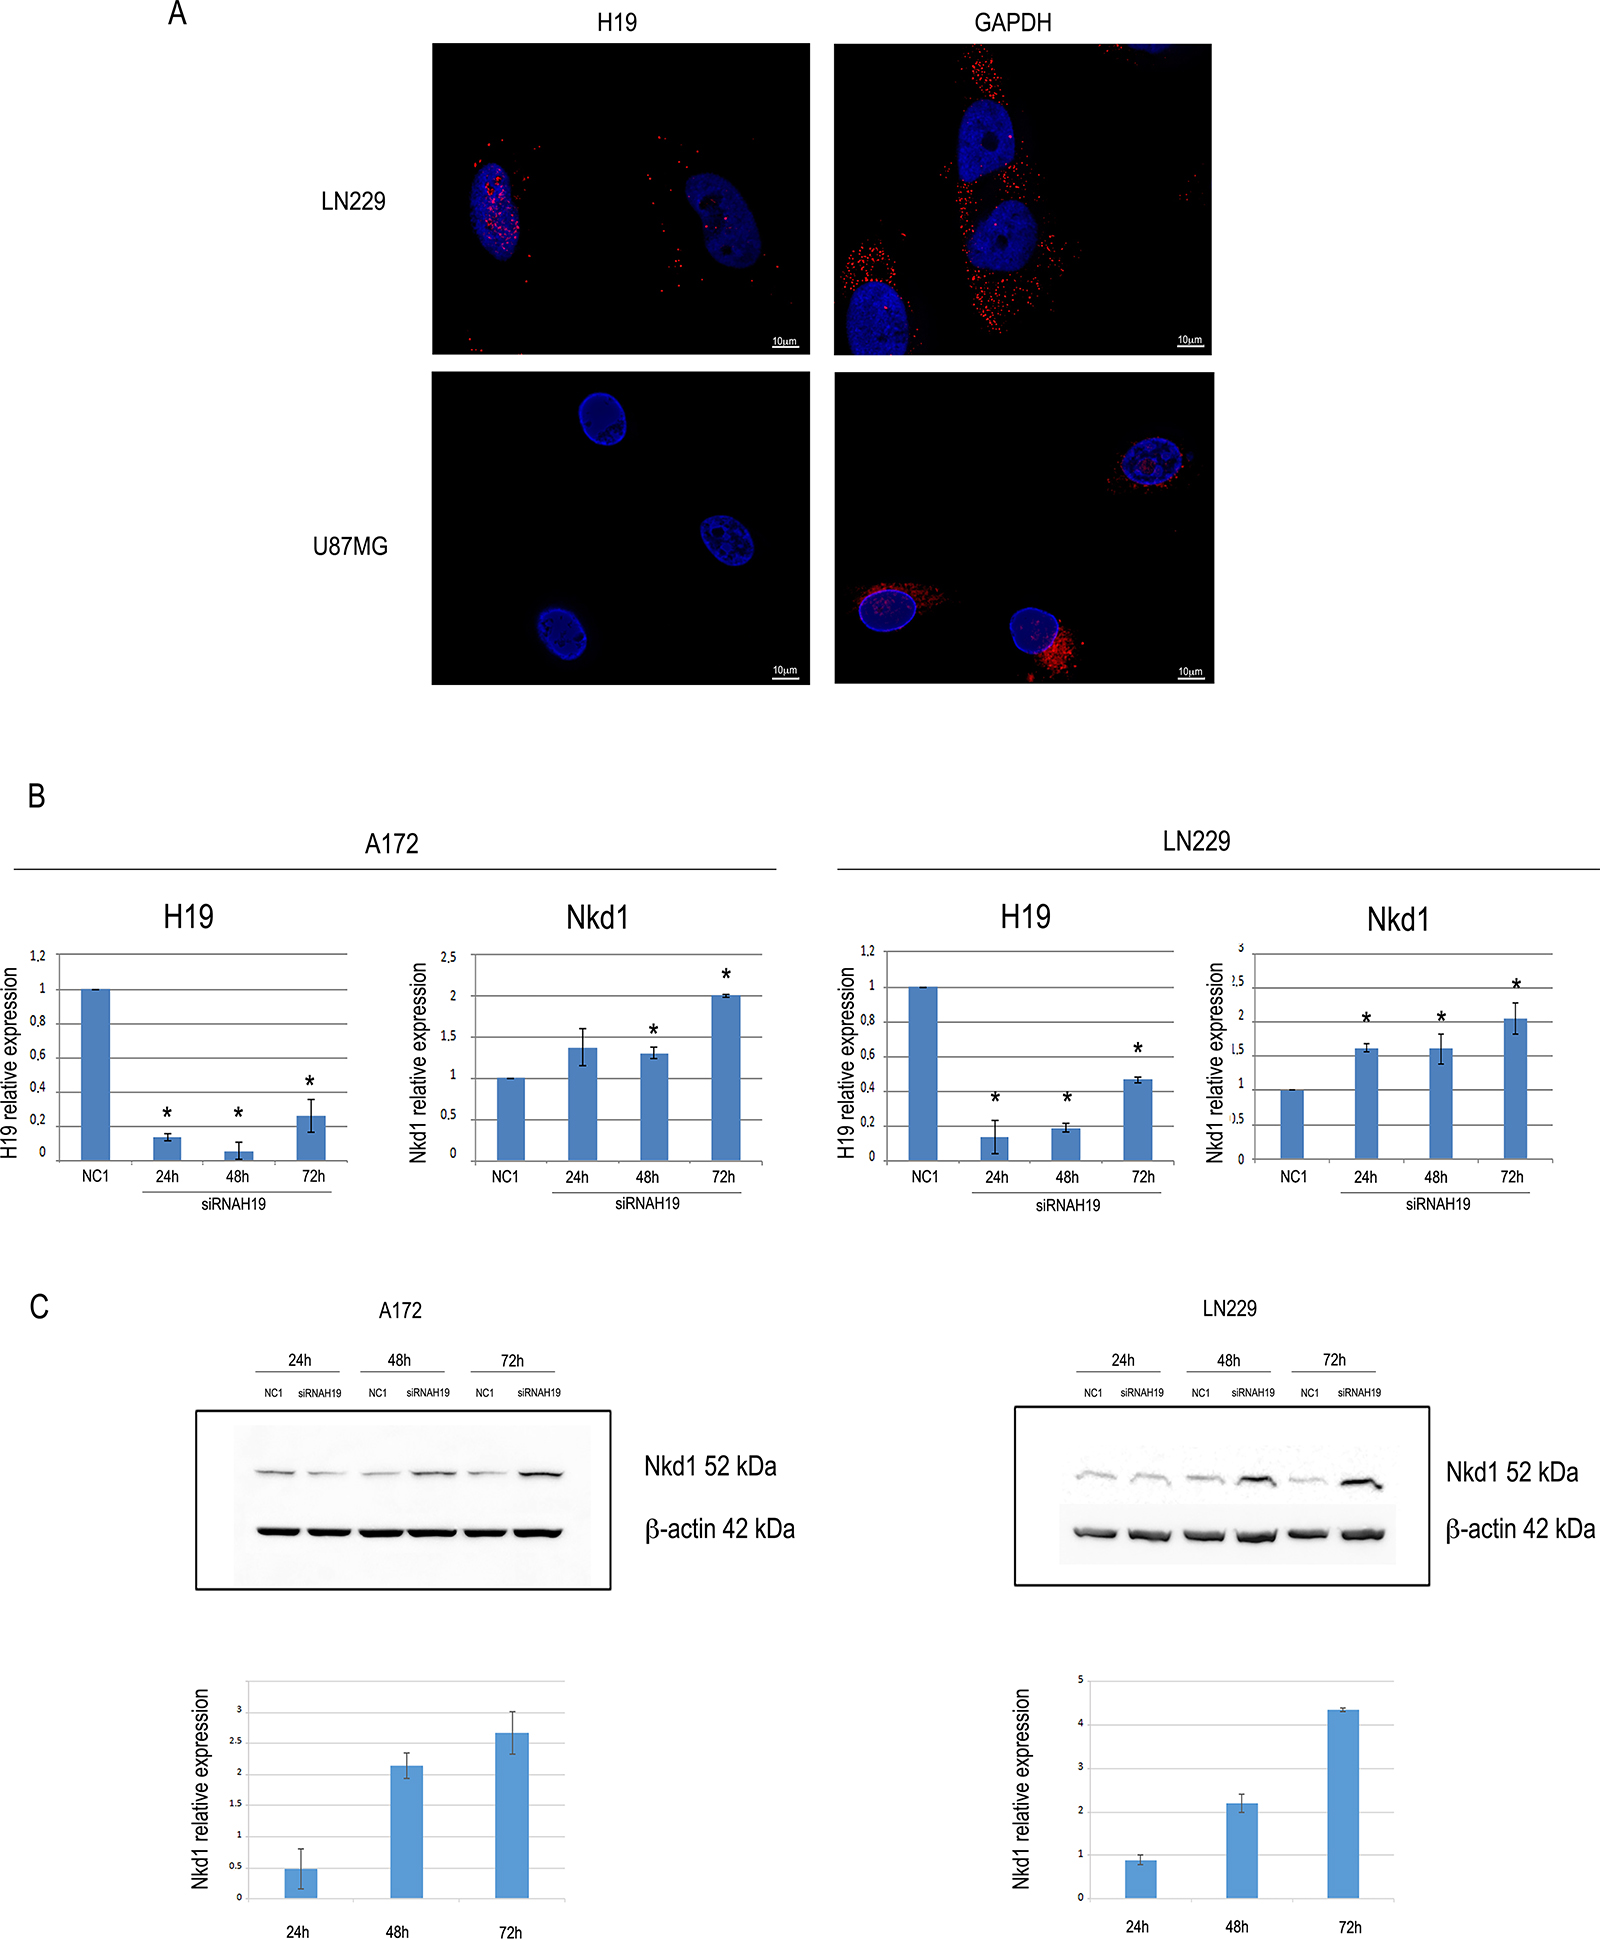 H19 localizes at both nuclear and cytoplasmic regions in LN229 glioblastoma cells, and its knock-down increases the expression of Nkd1.